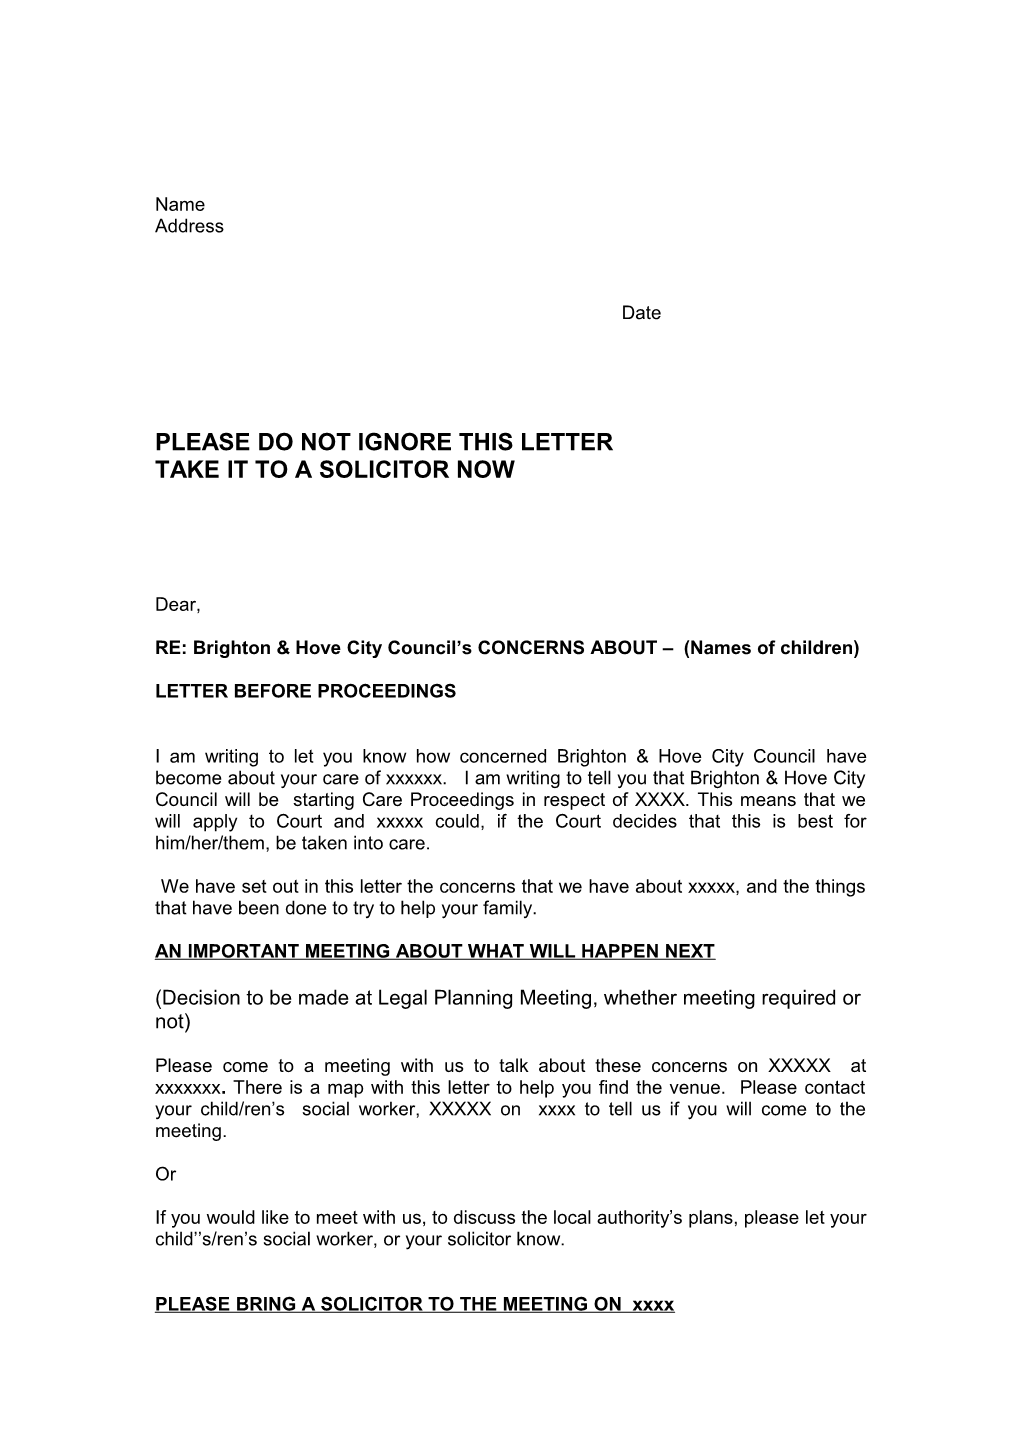 Please Do Not Ignore This Letter Take It to a Solicitor Now